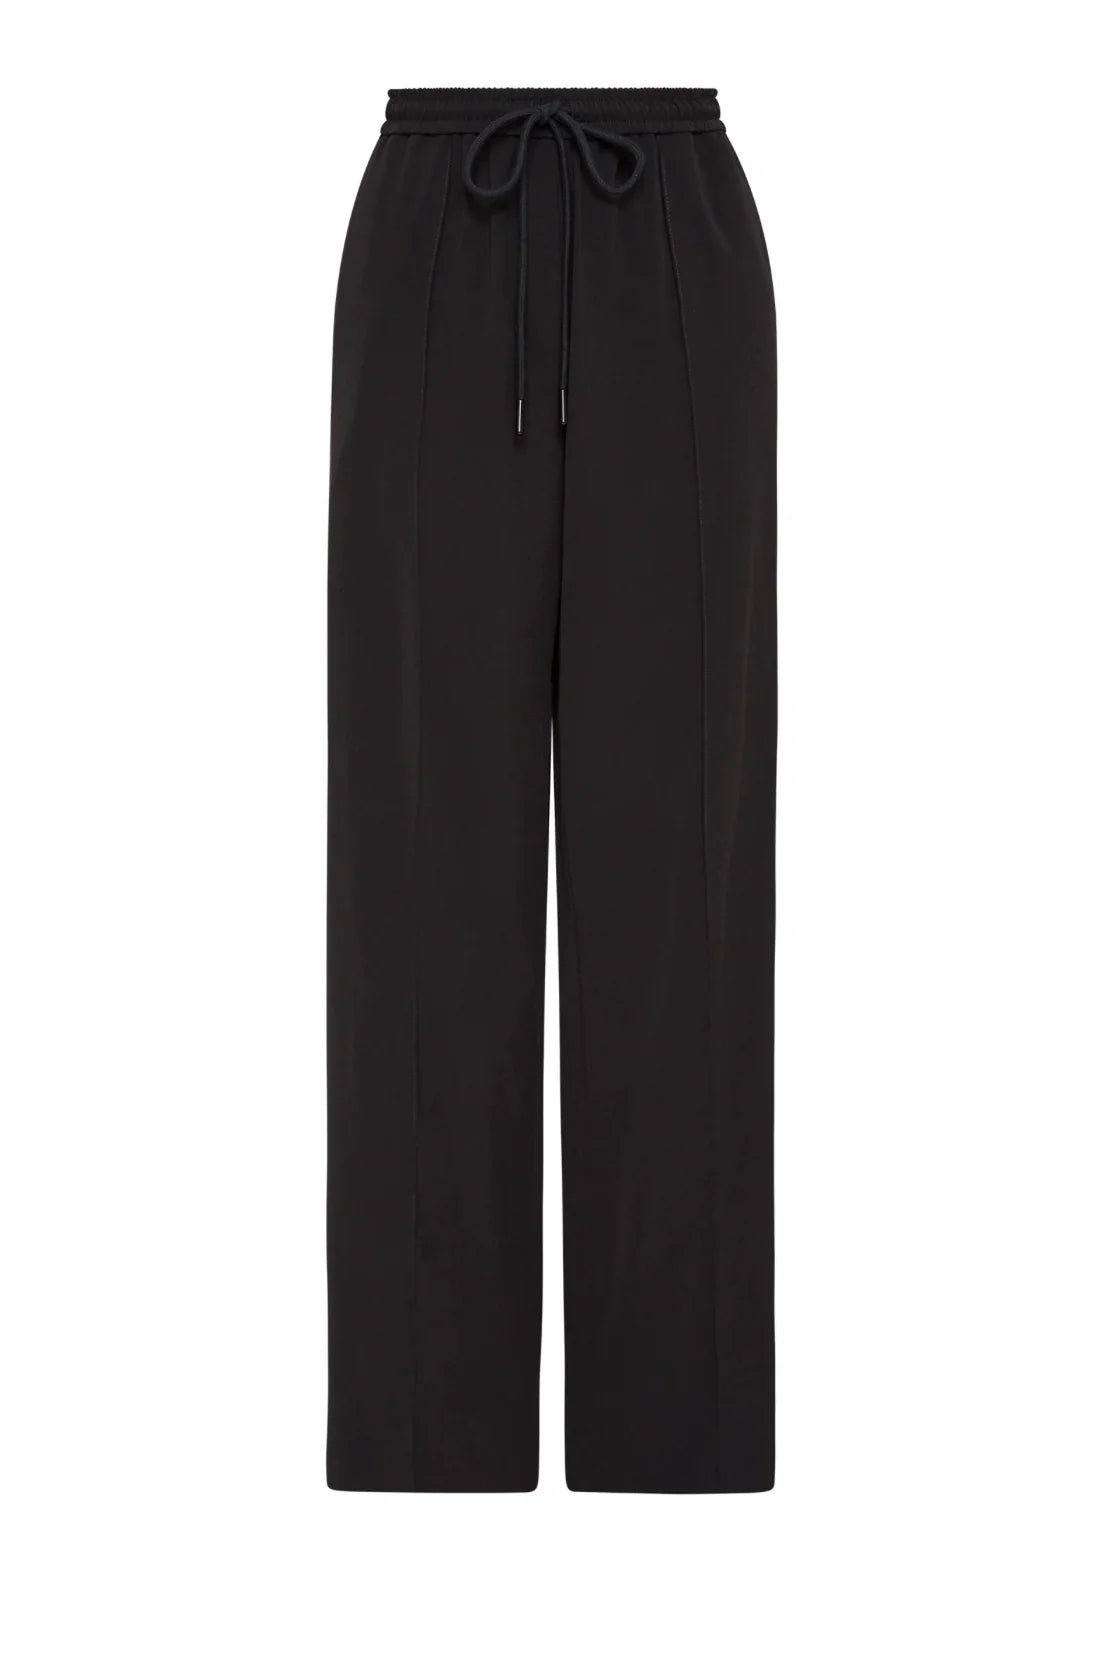 Nude Lucy - QUINCY PANT Black